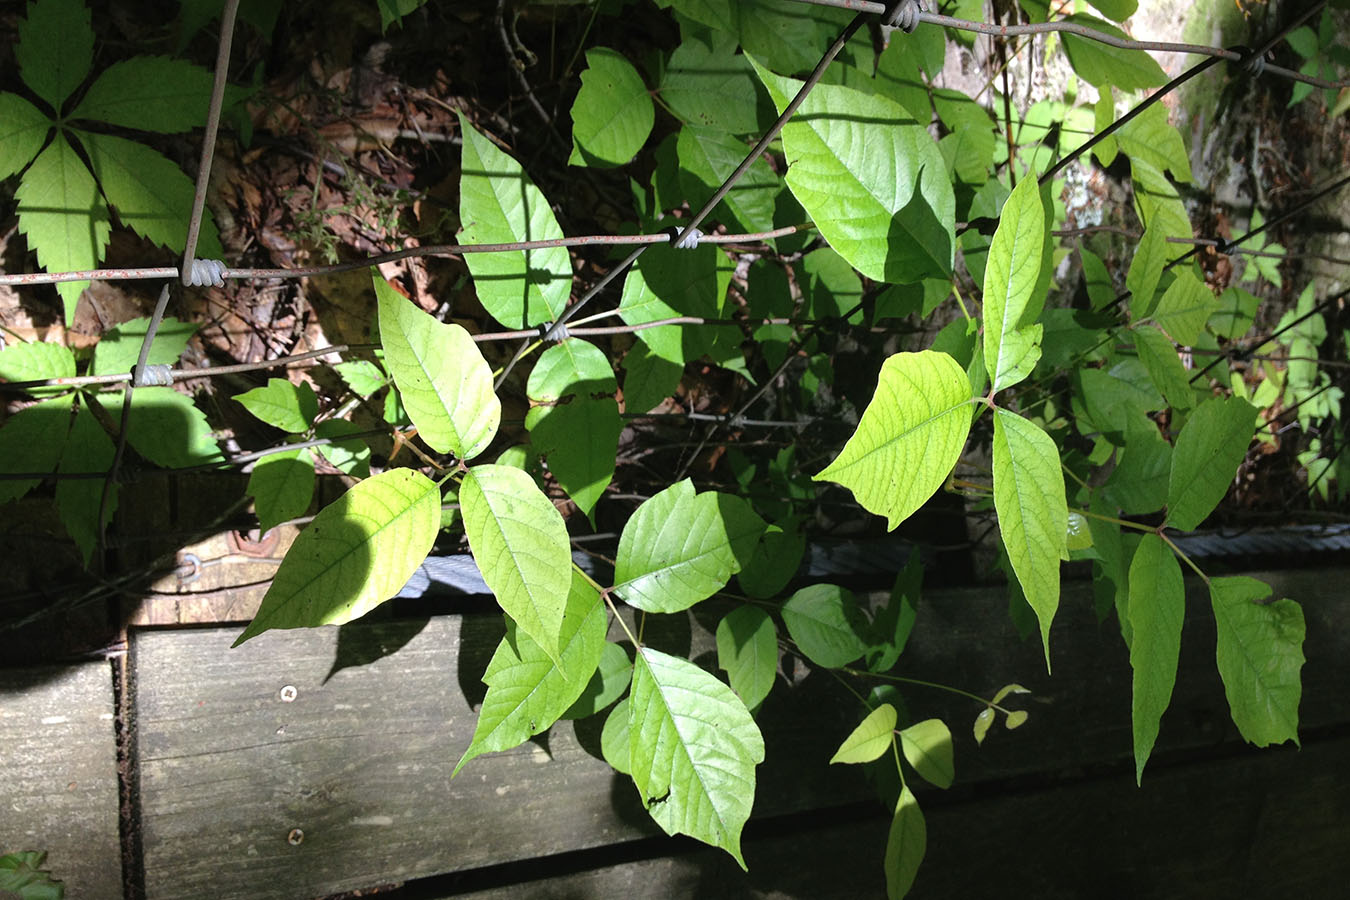 Poison Ivy, A ‘Familiar Stranger’ That Could Ruin Your Summer | Kaiser